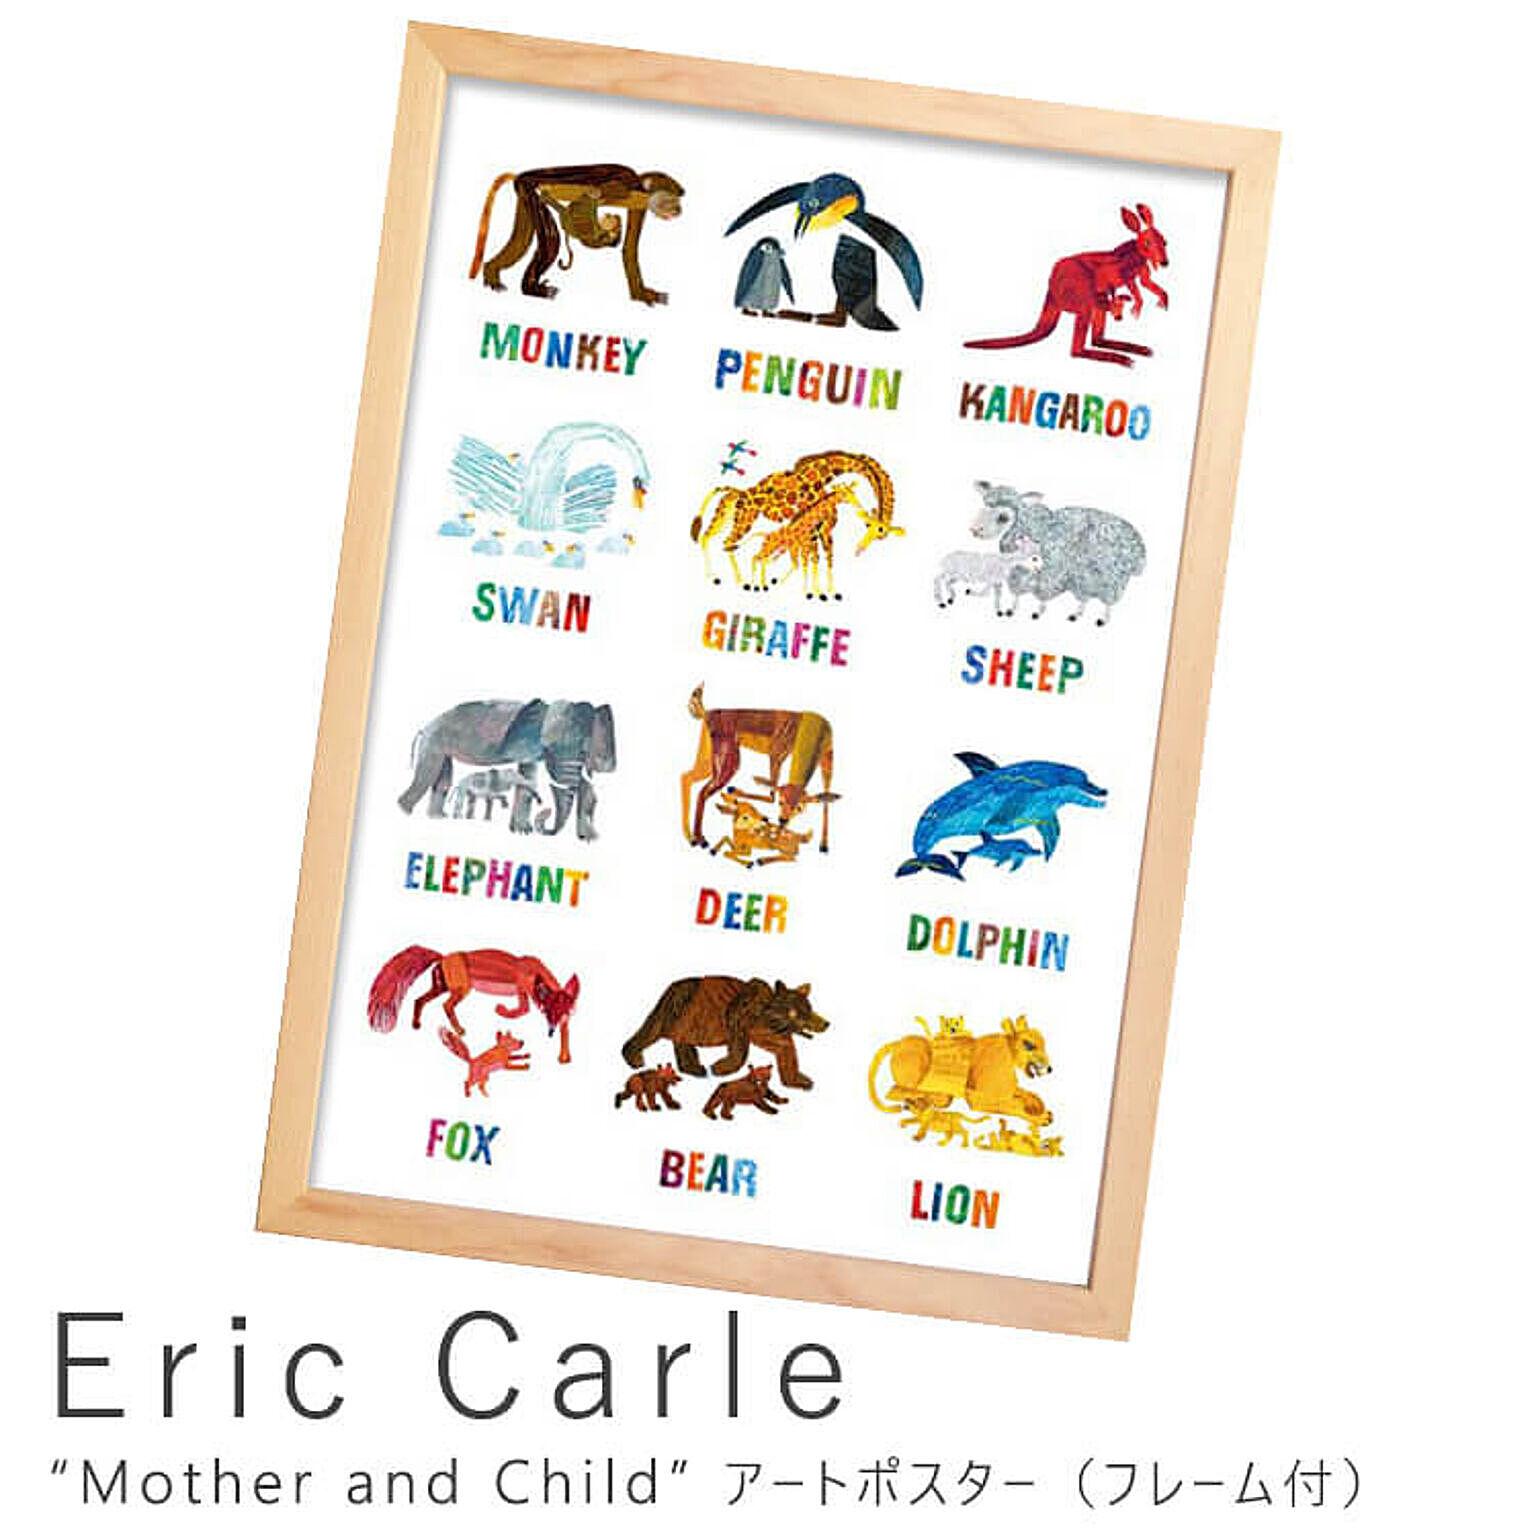 Eric Carle（エリック カール） Mother and Child アートポスター（フレーム付き） m05400